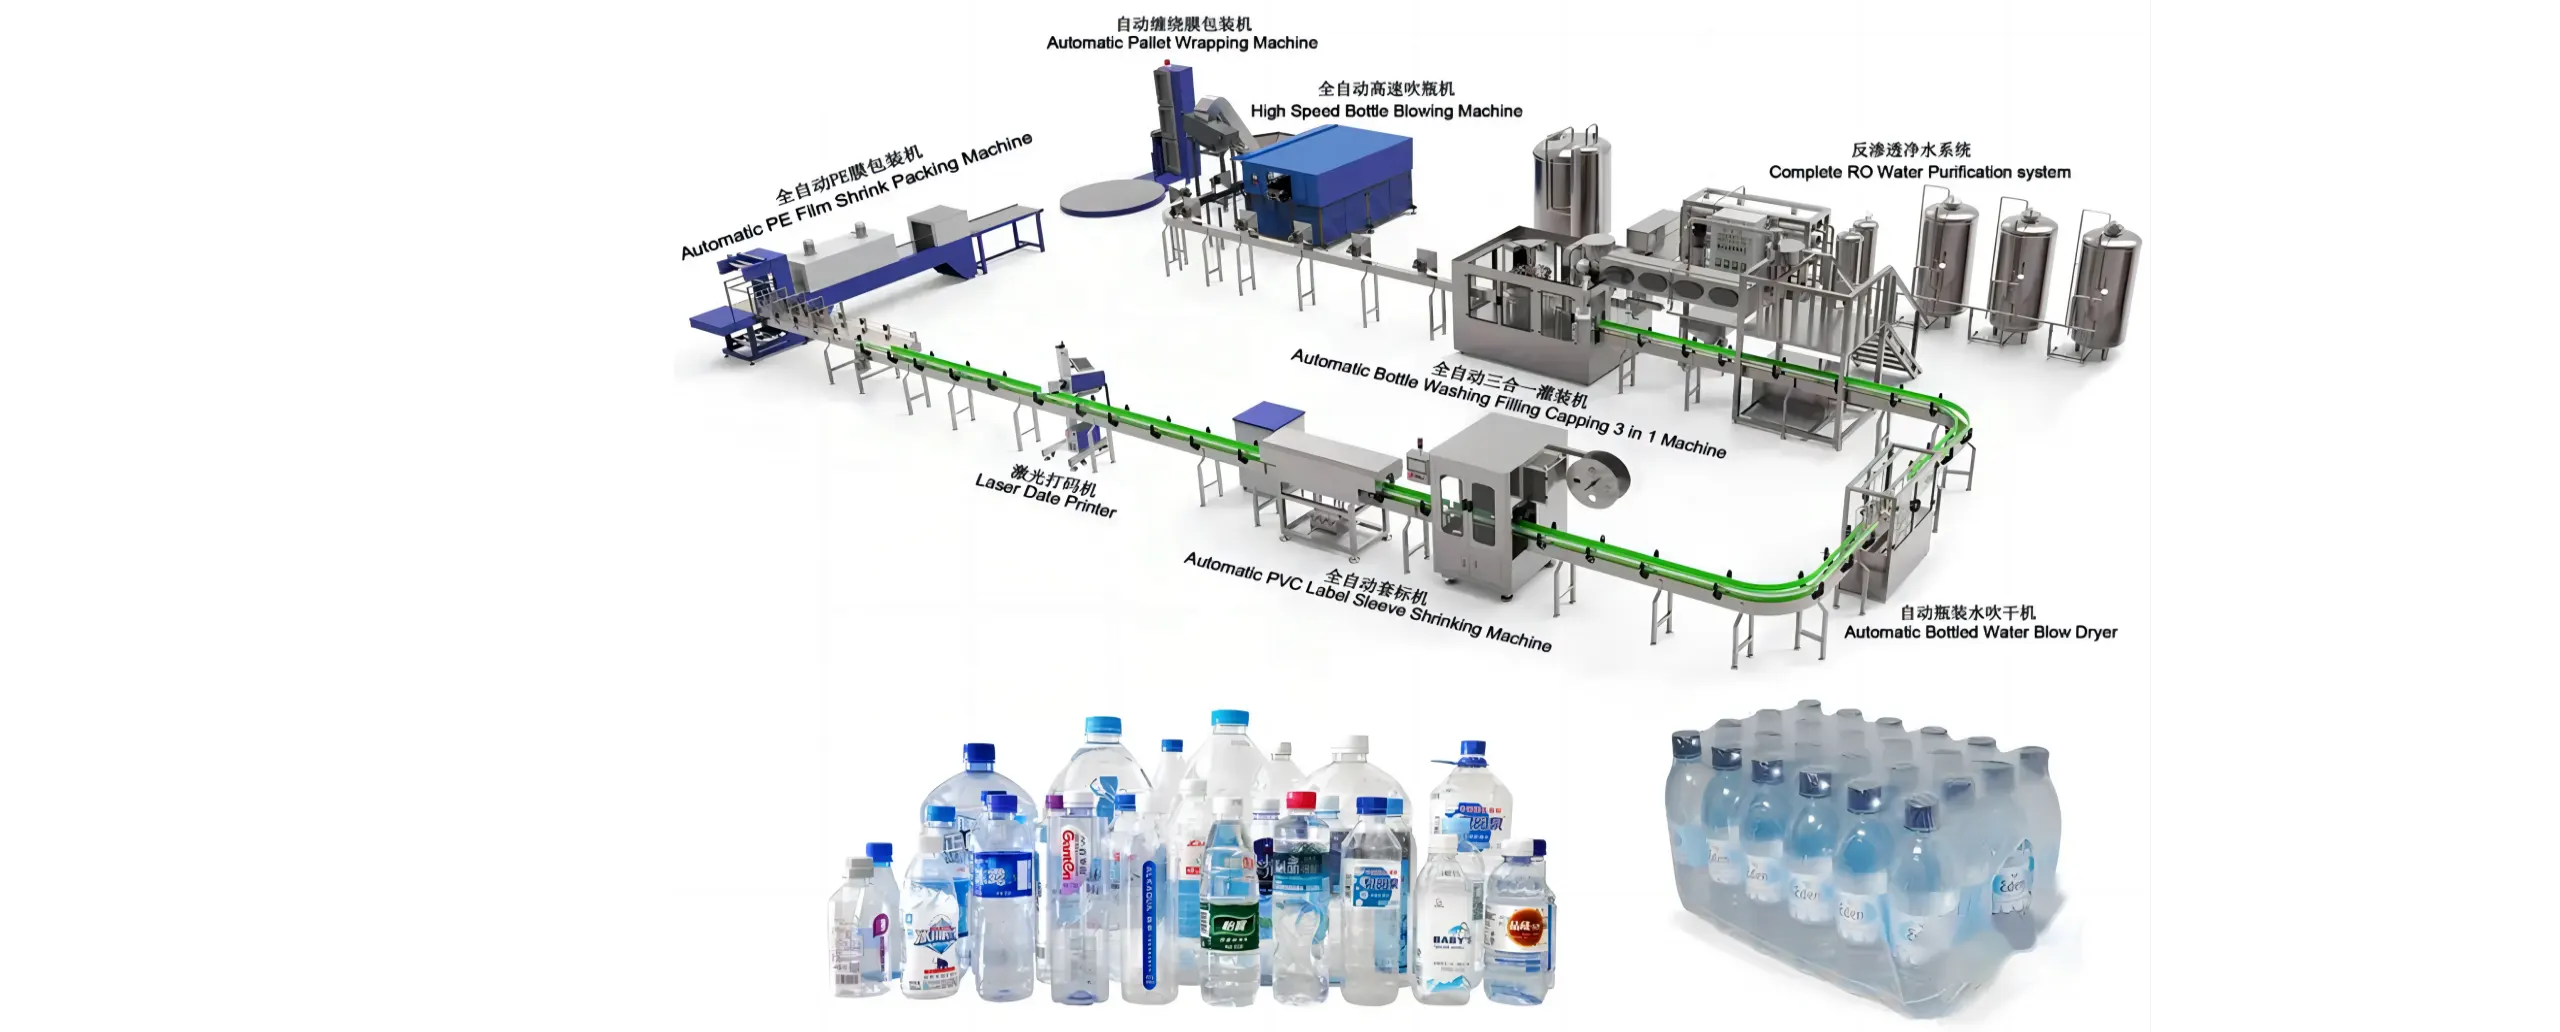 Bottled Drinking Water Production Line: Equipment and Production Process